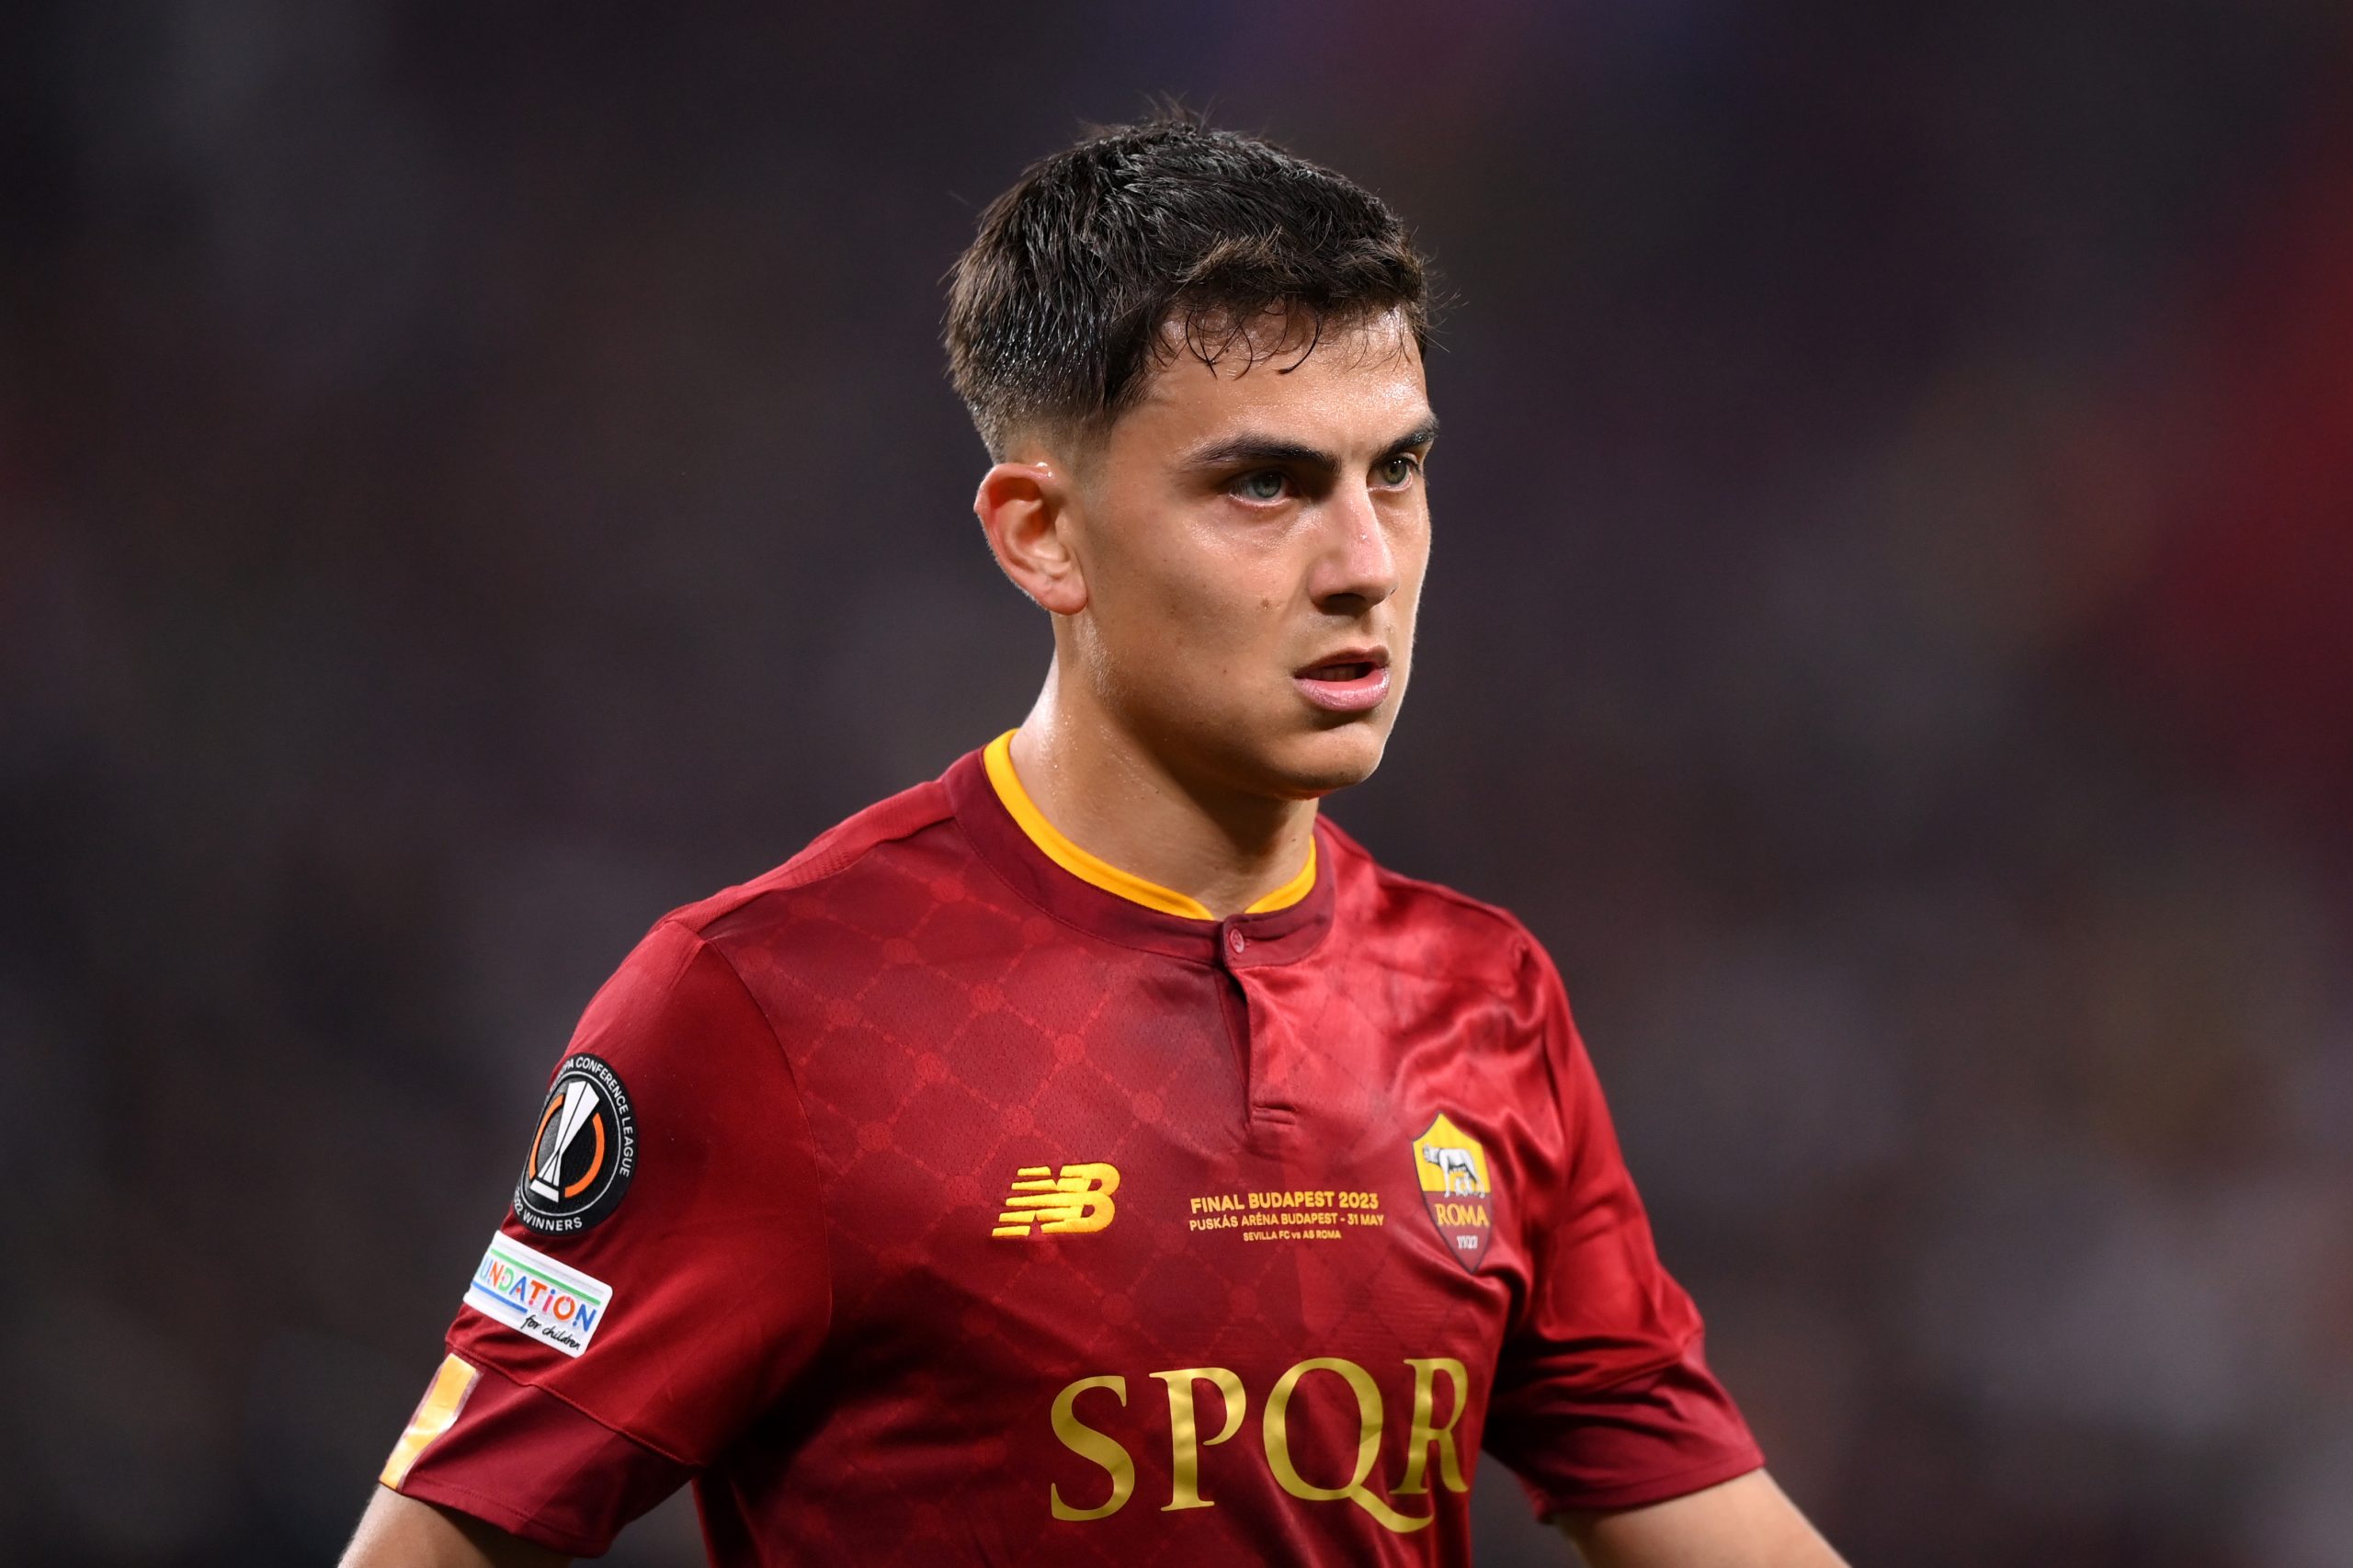 Chelsea enquire about AS Roma forward and Tottenham Hotspur target Paulo Dybala.